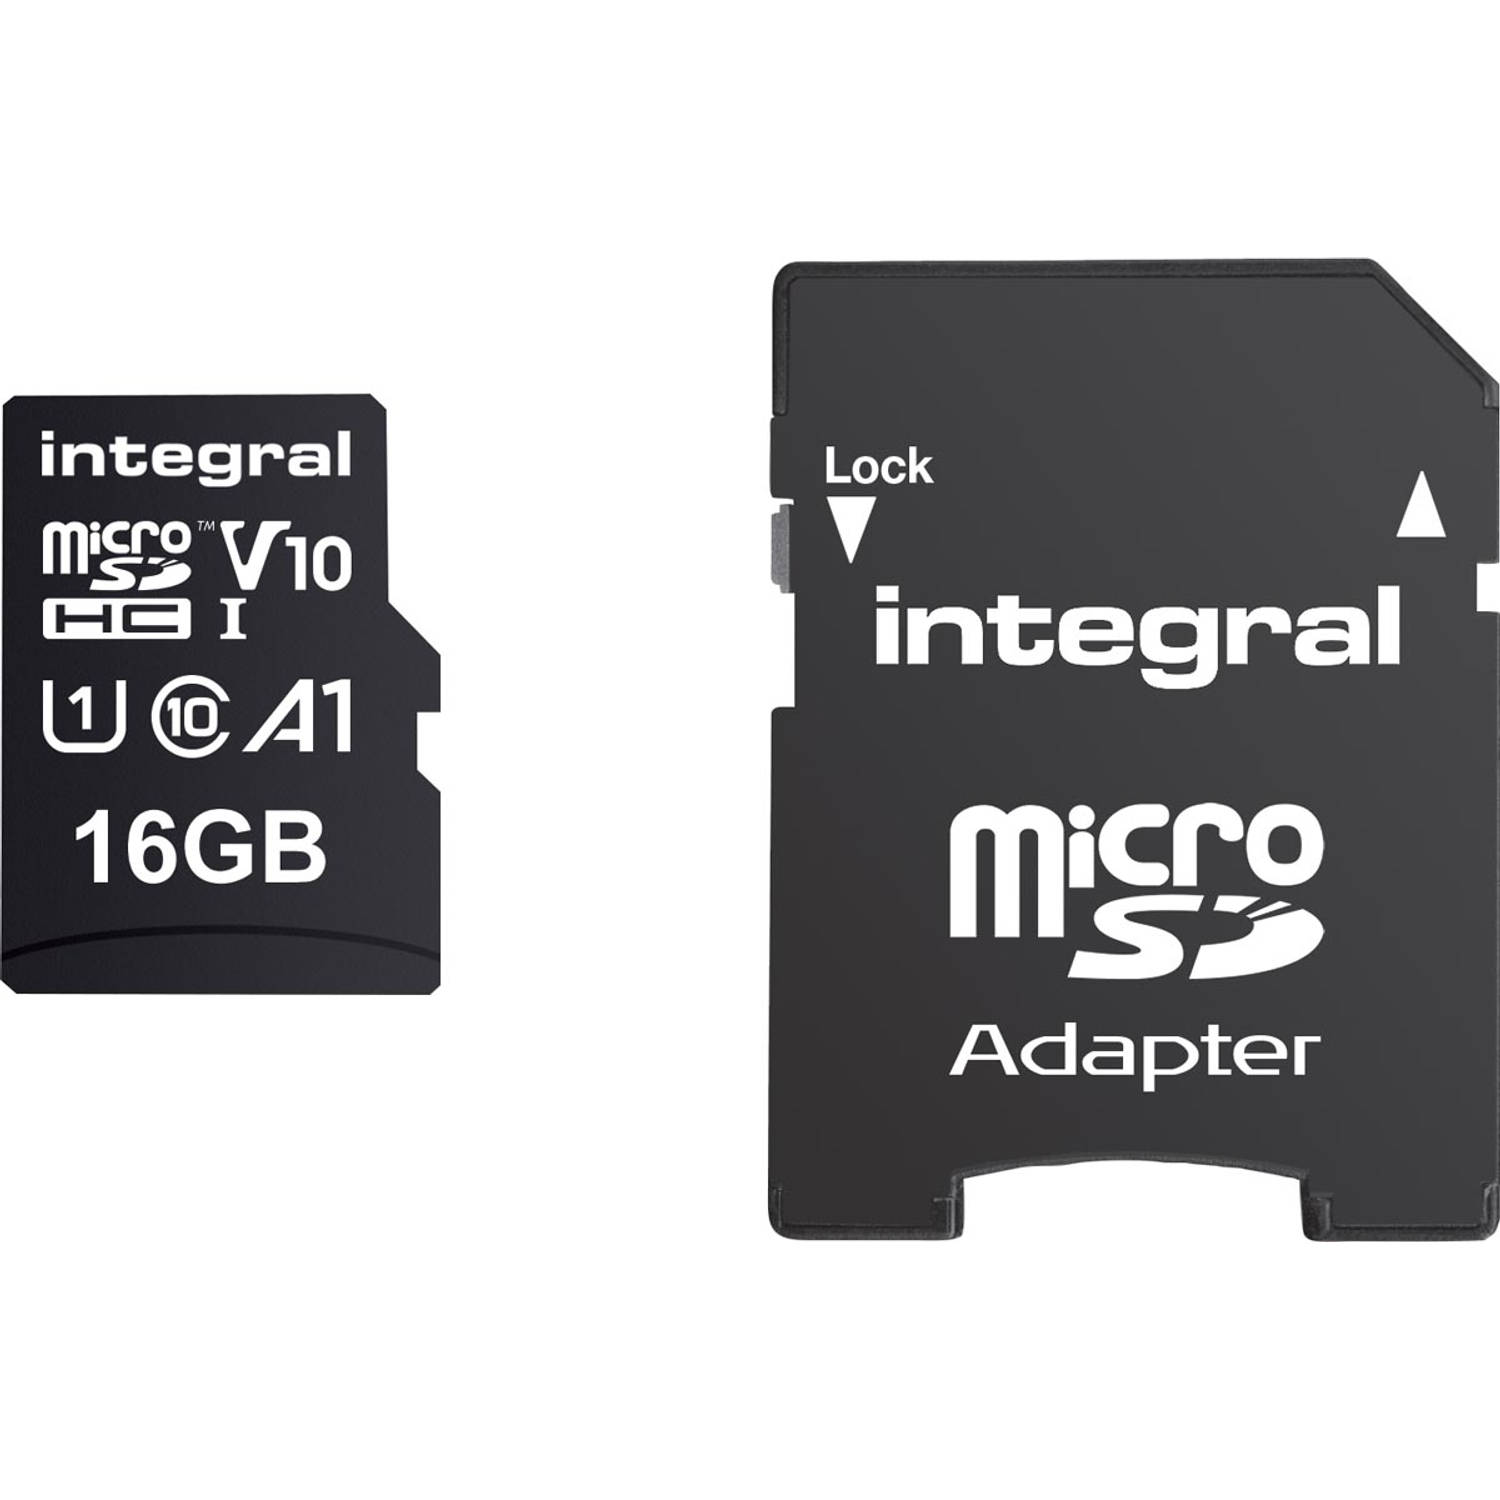 Geheugenkaart Integral Micro SDHC V10 16GB